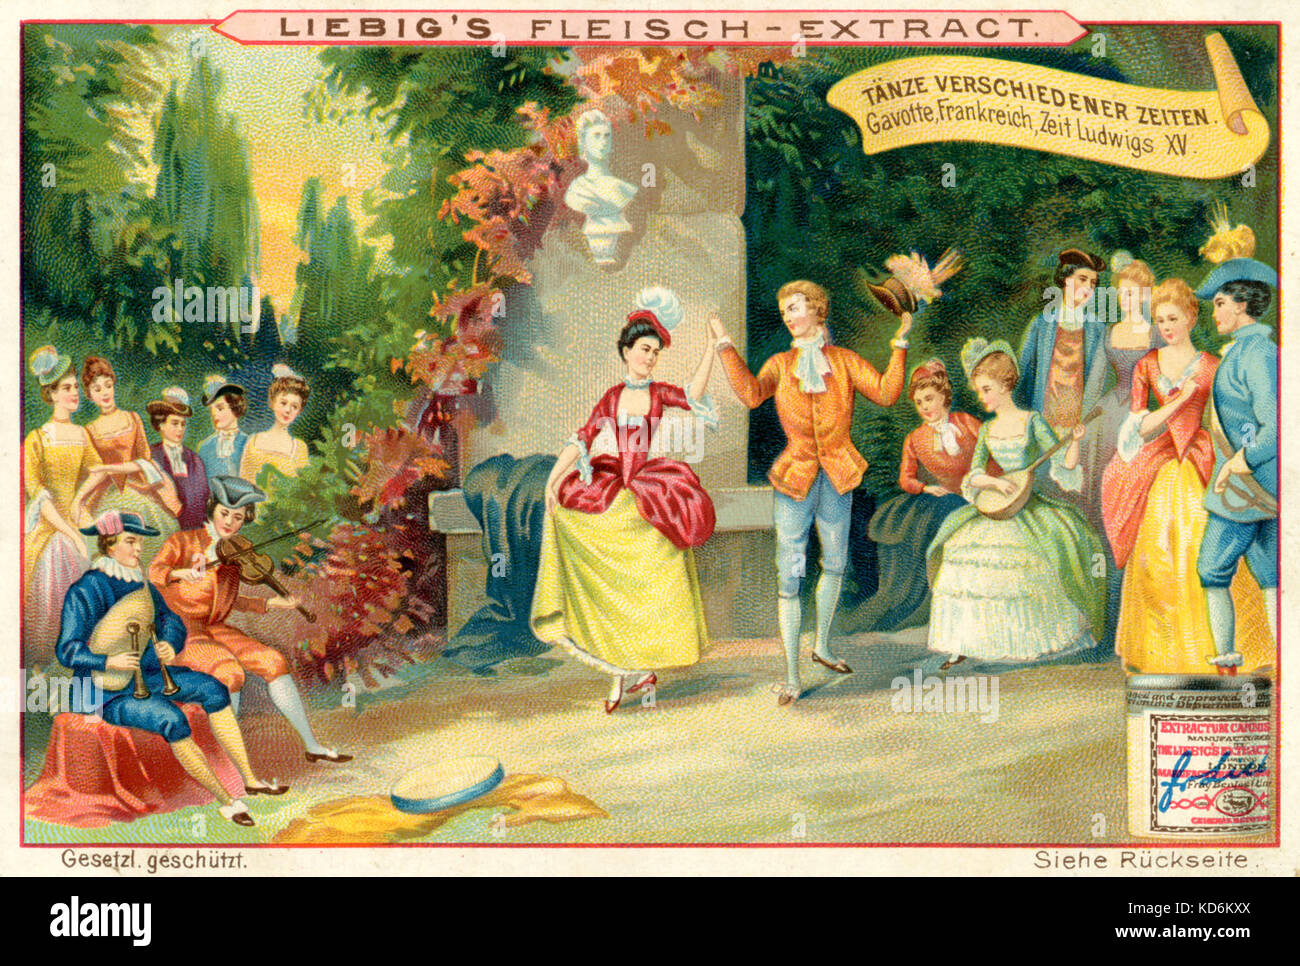 Couple dancing the gavotte in French garden scene. Time of  Louis XV (1710 - 1774), Baroque. Minuet  Instruments include bagpipes, viola, guitar. France Liebig Fleisch-Extract collection cards. Stock Photo